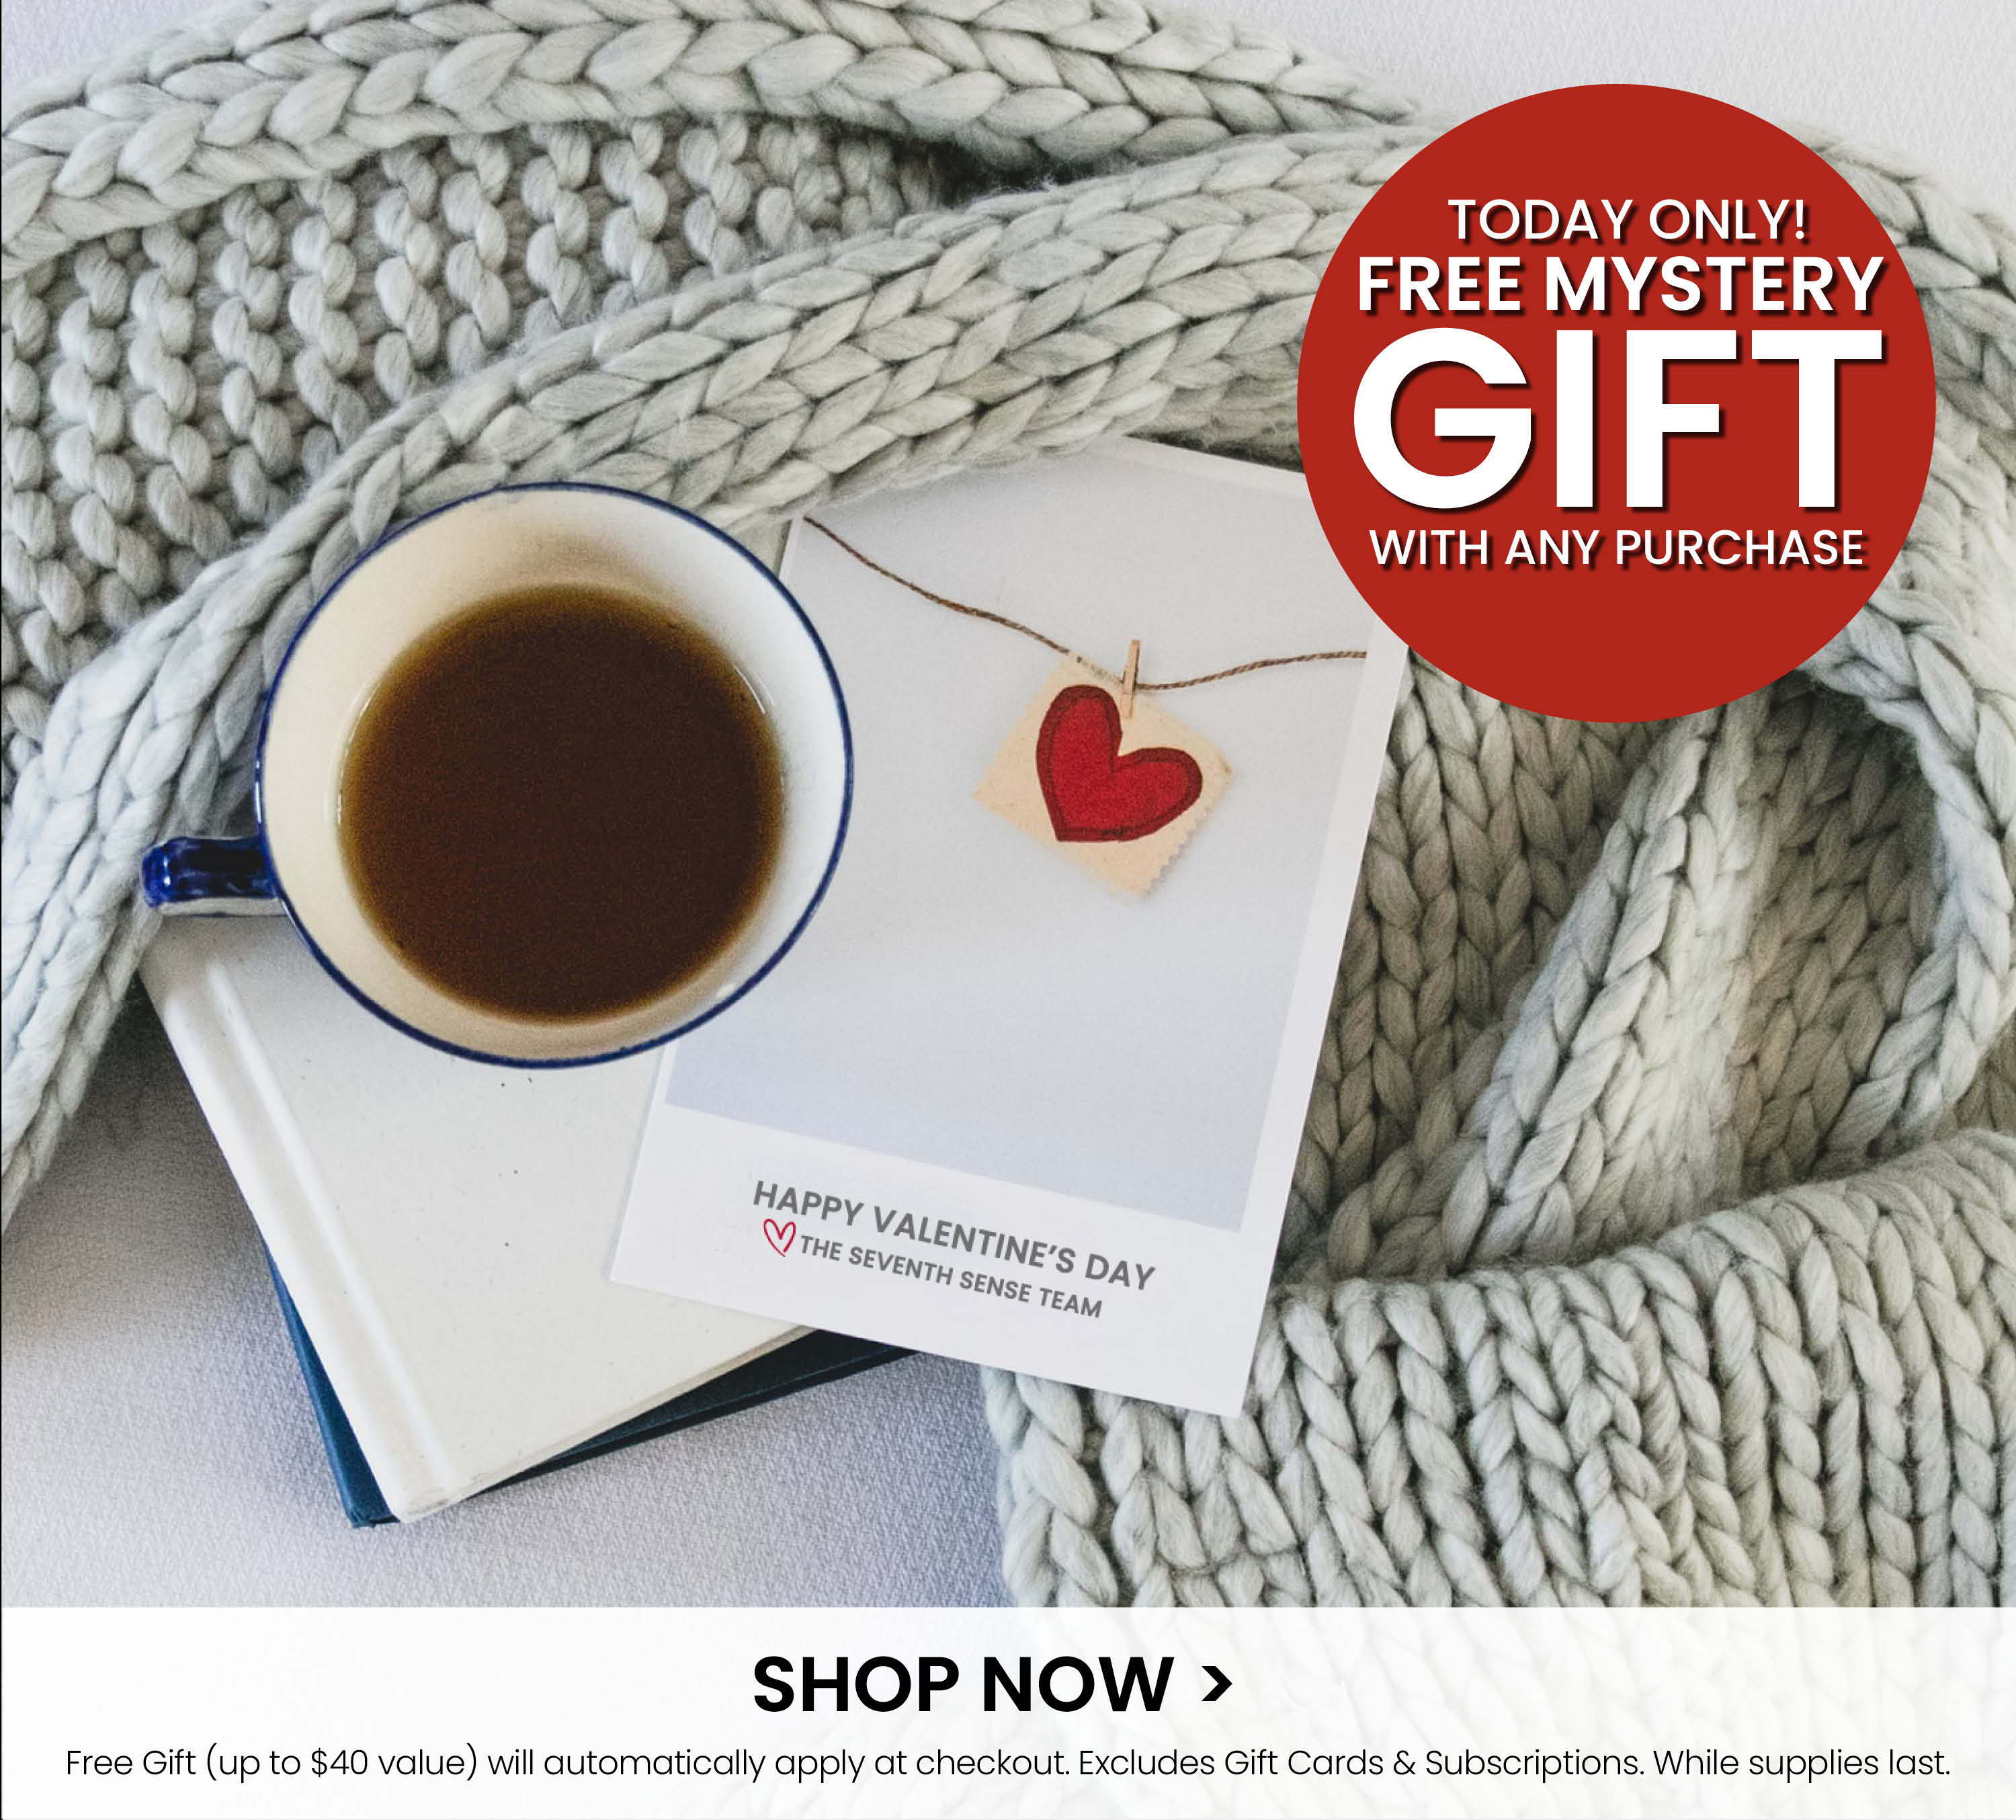 Today Only! Free Mystery Gift with any purchase.